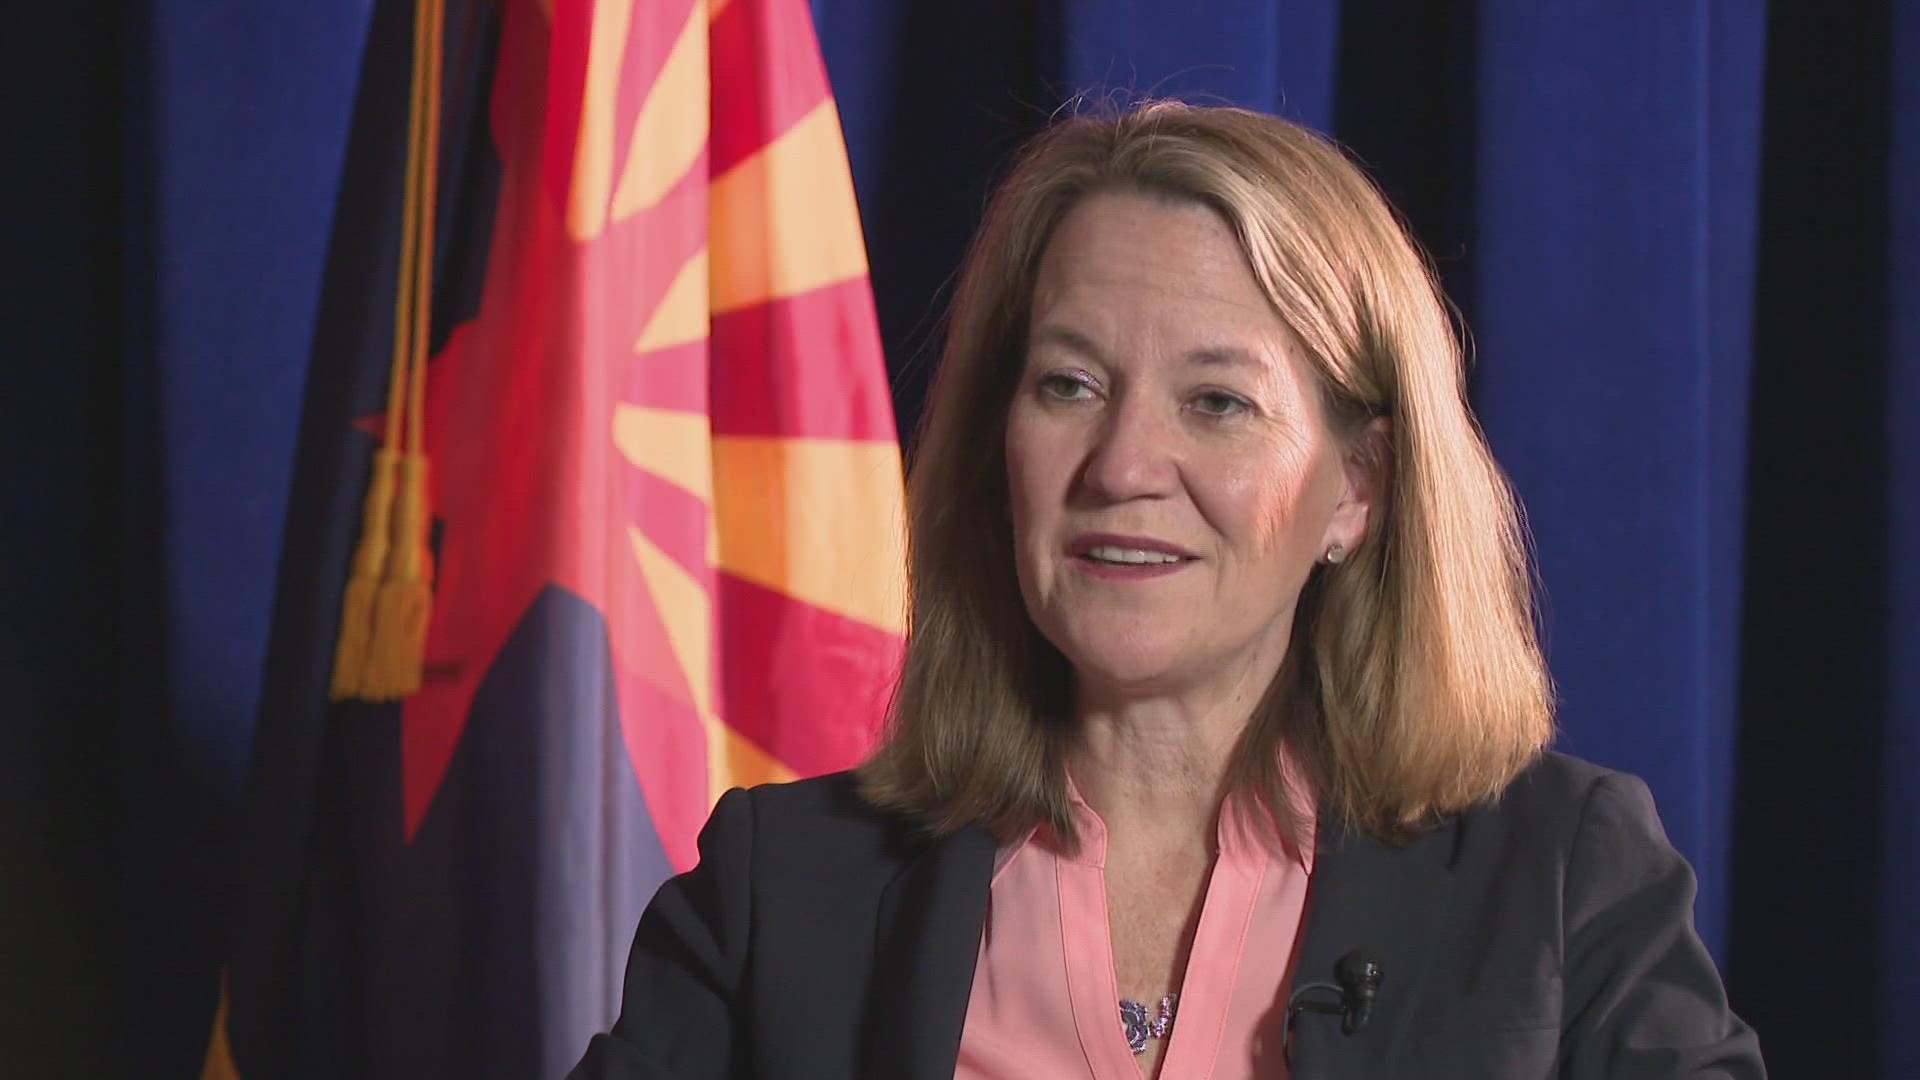 12News sat down with Attorney General Kris Mayes in this 1-on-1 exclusive interview.